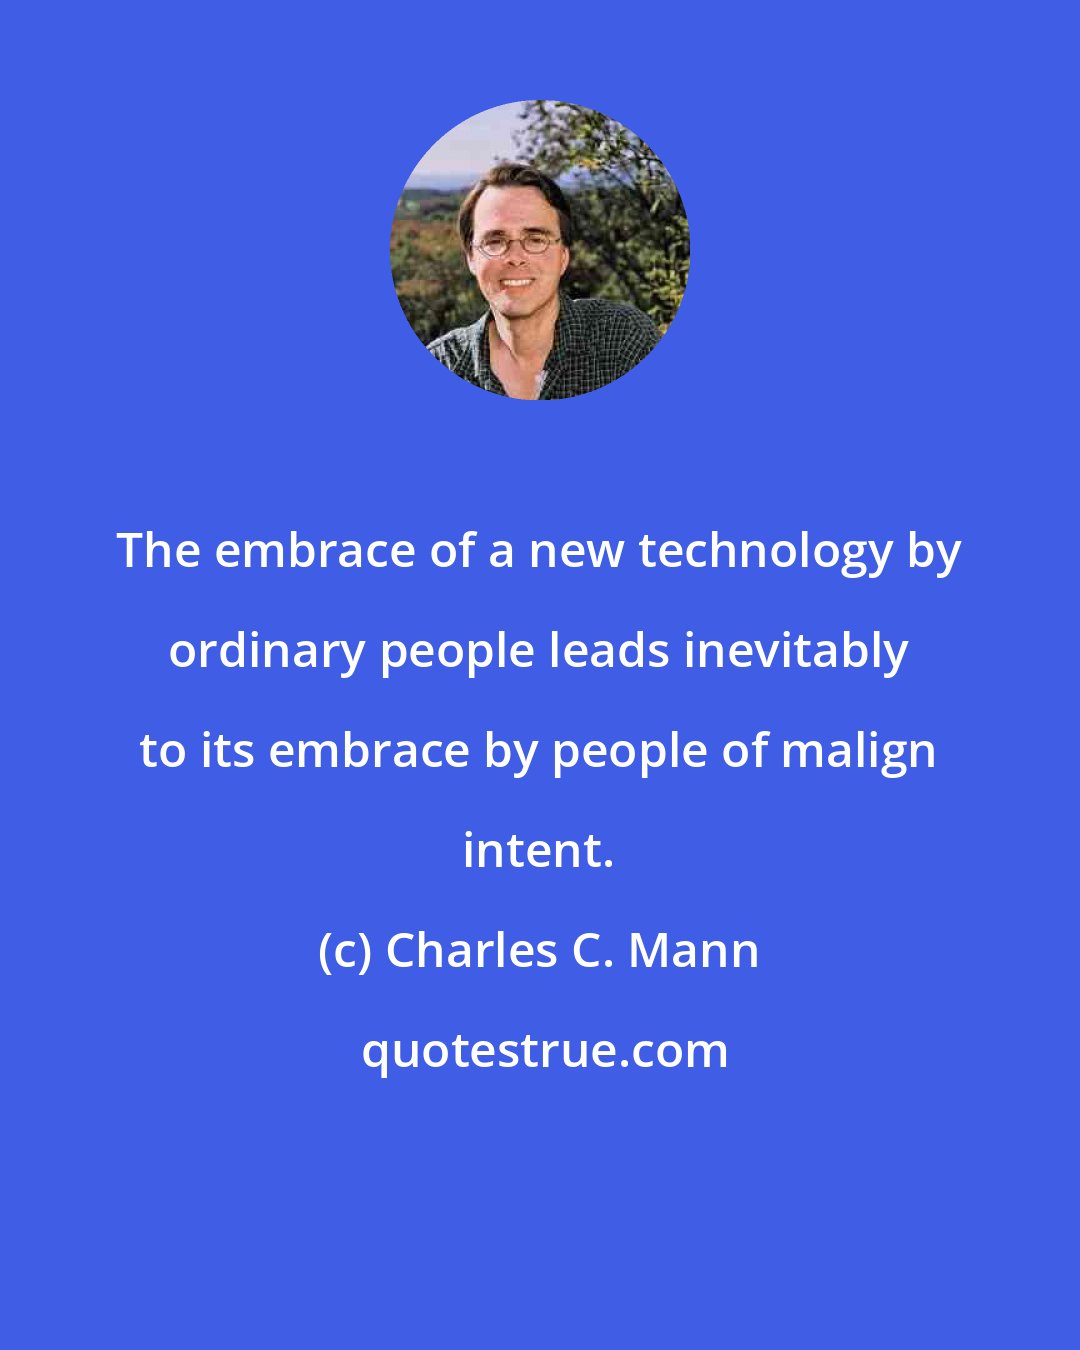 Charles C. Mann: The embrace of a new technology by ordinary people leads inevitably to its embrace by people of malign intent.